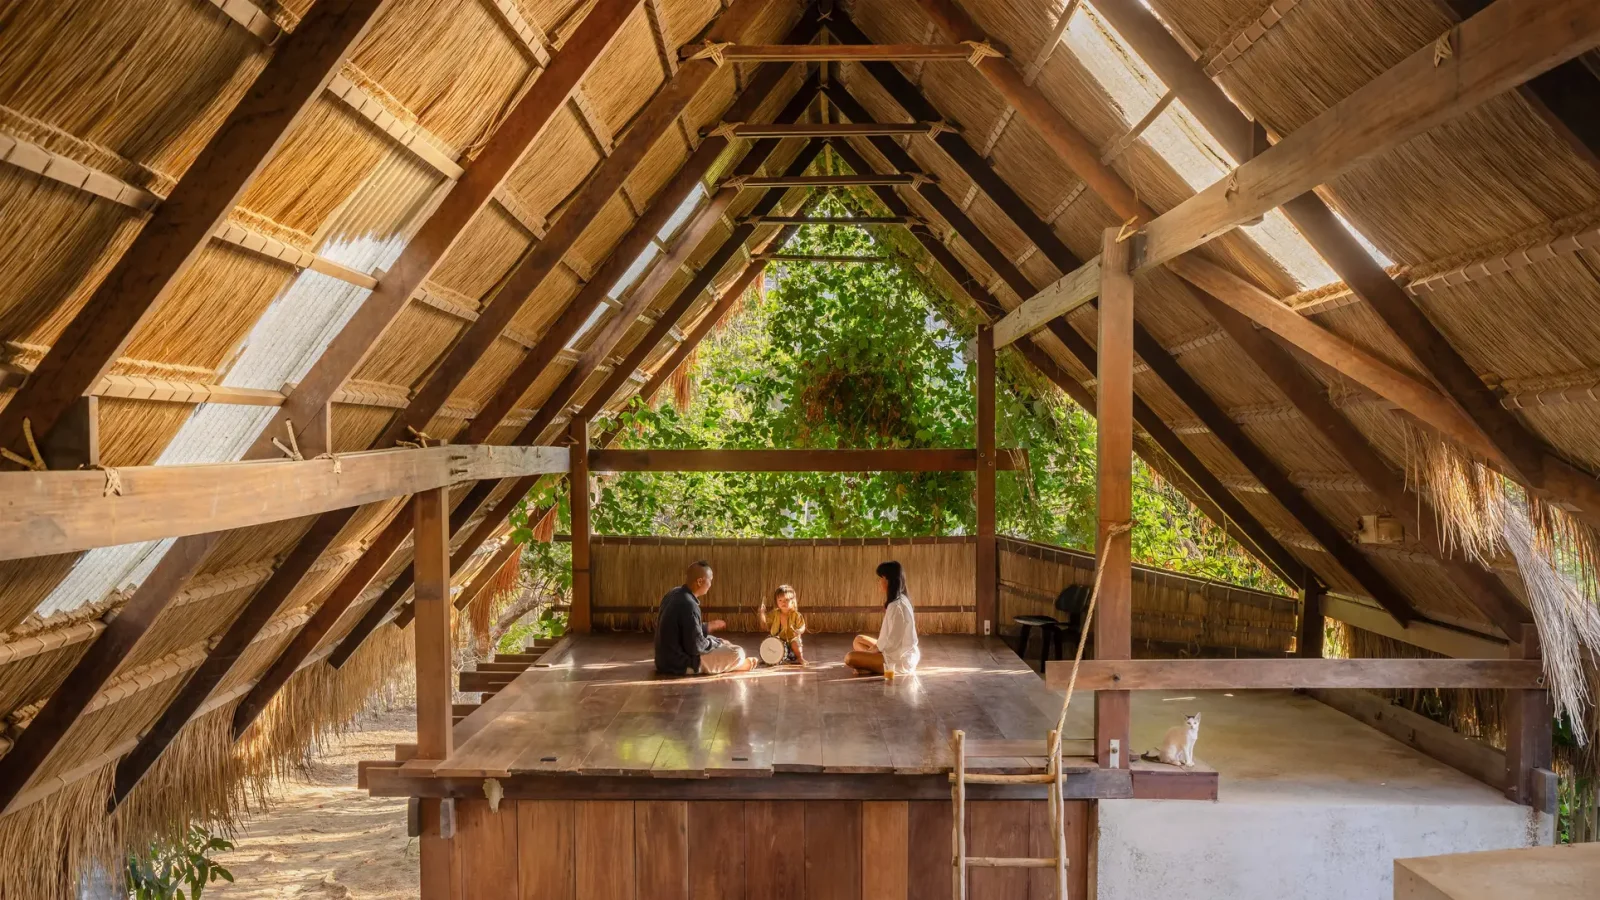 This Architect Built A Family Home Deep in Nature Leaving City Life